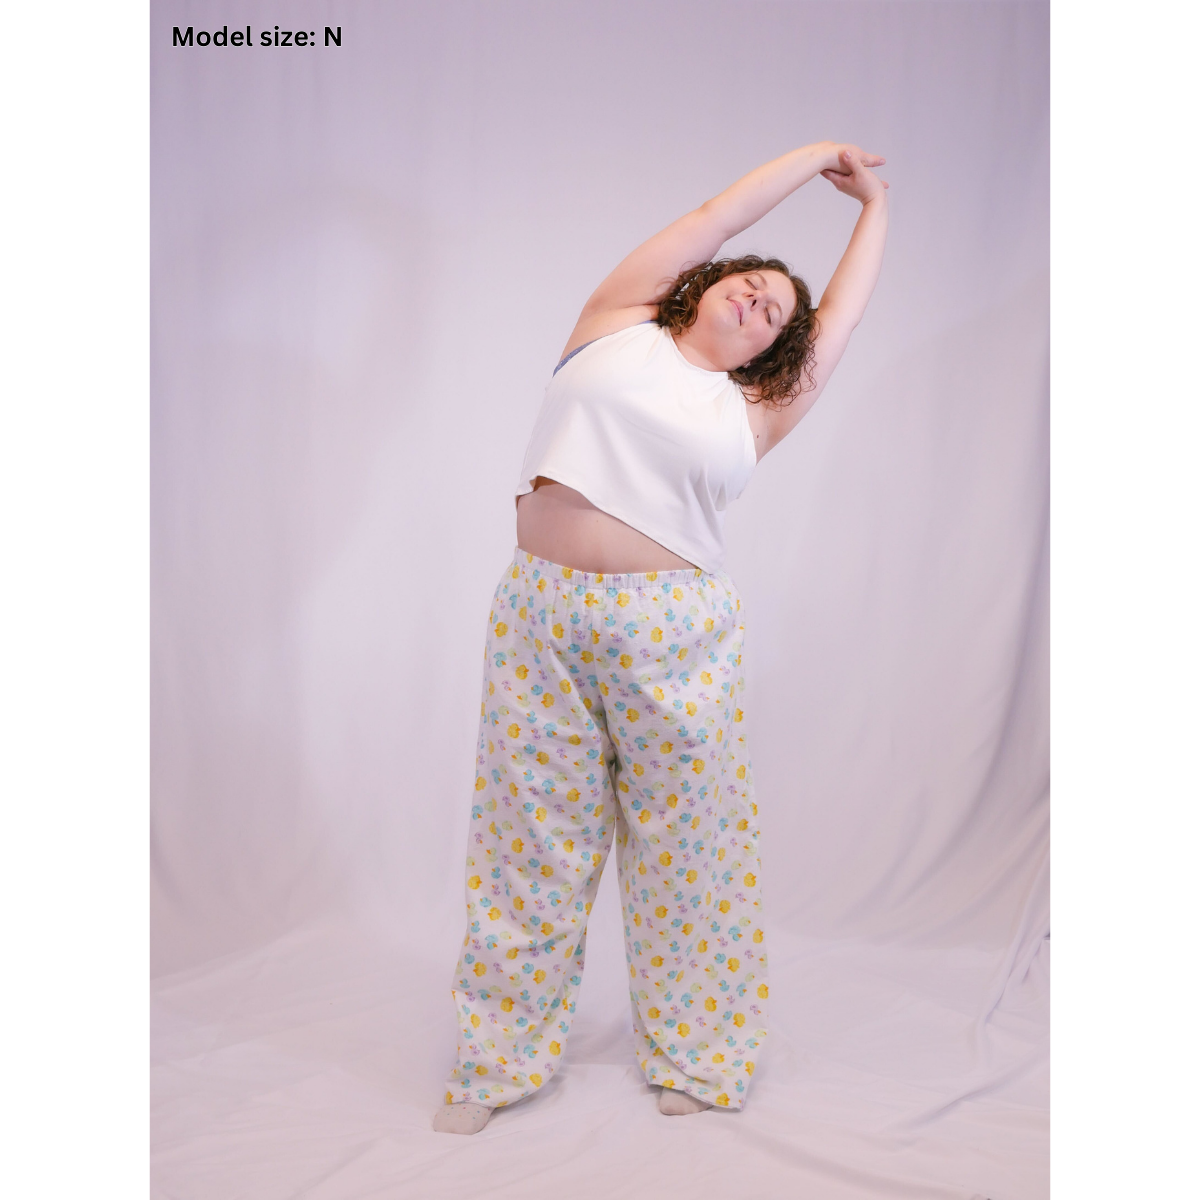 A photo of a woman wearing rubber ducky white pajama pants (size N) and a white sleeveless crop top (size H).